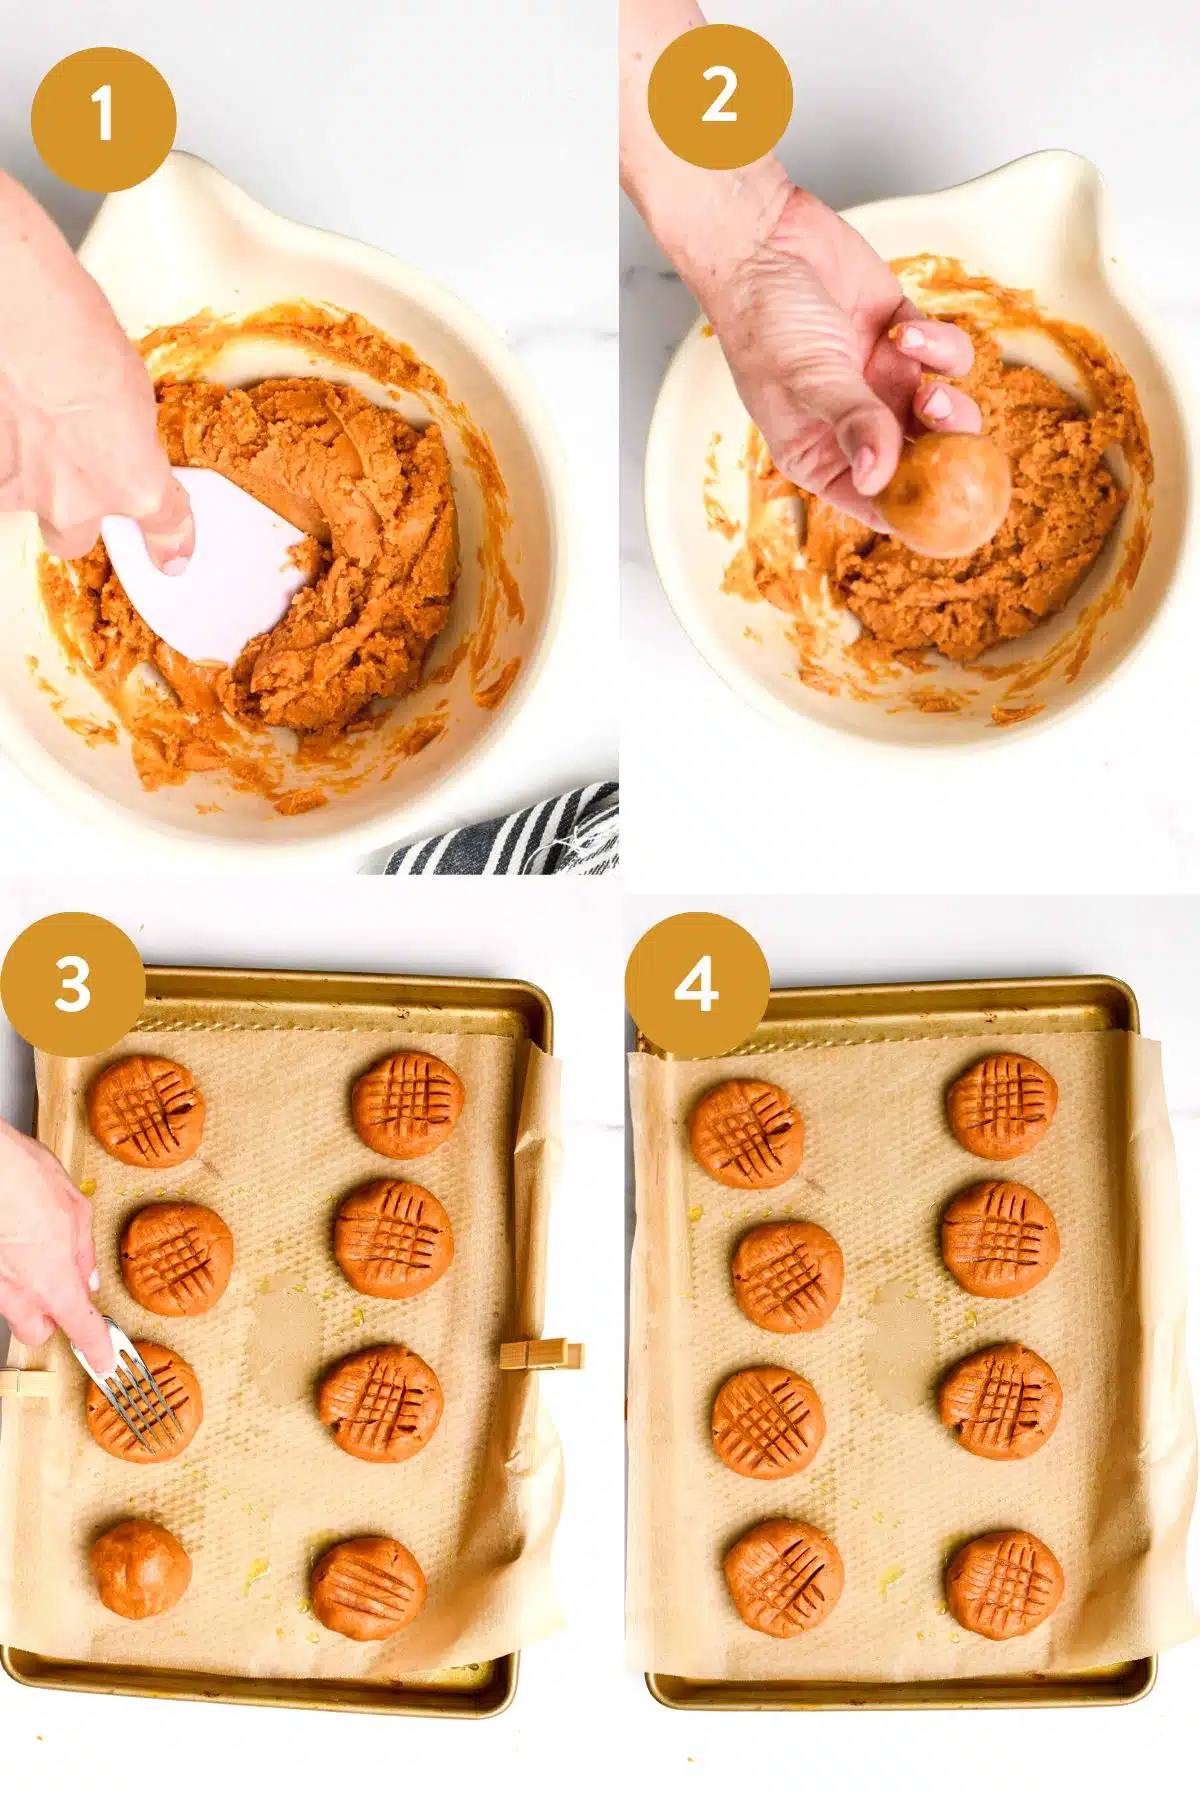 These 4 ingredient Peanut Butter Cookies are the easiest cookies for peanut butter lovers, ultra crunchy and ready in 20 minutes.Plus, these are flourless, gluten-free and dairy-free and the best allergy-friendly peanut butter cookies to share. These 4 ingredient Peanut Butter Cookies are the easiest cookies for peanut butter lovers, ultra crunchy and ready in 20 minutes.Plus, these are flourless, gluten-free and dairy-free and the best allergy-friendly peanut butter cookies to share